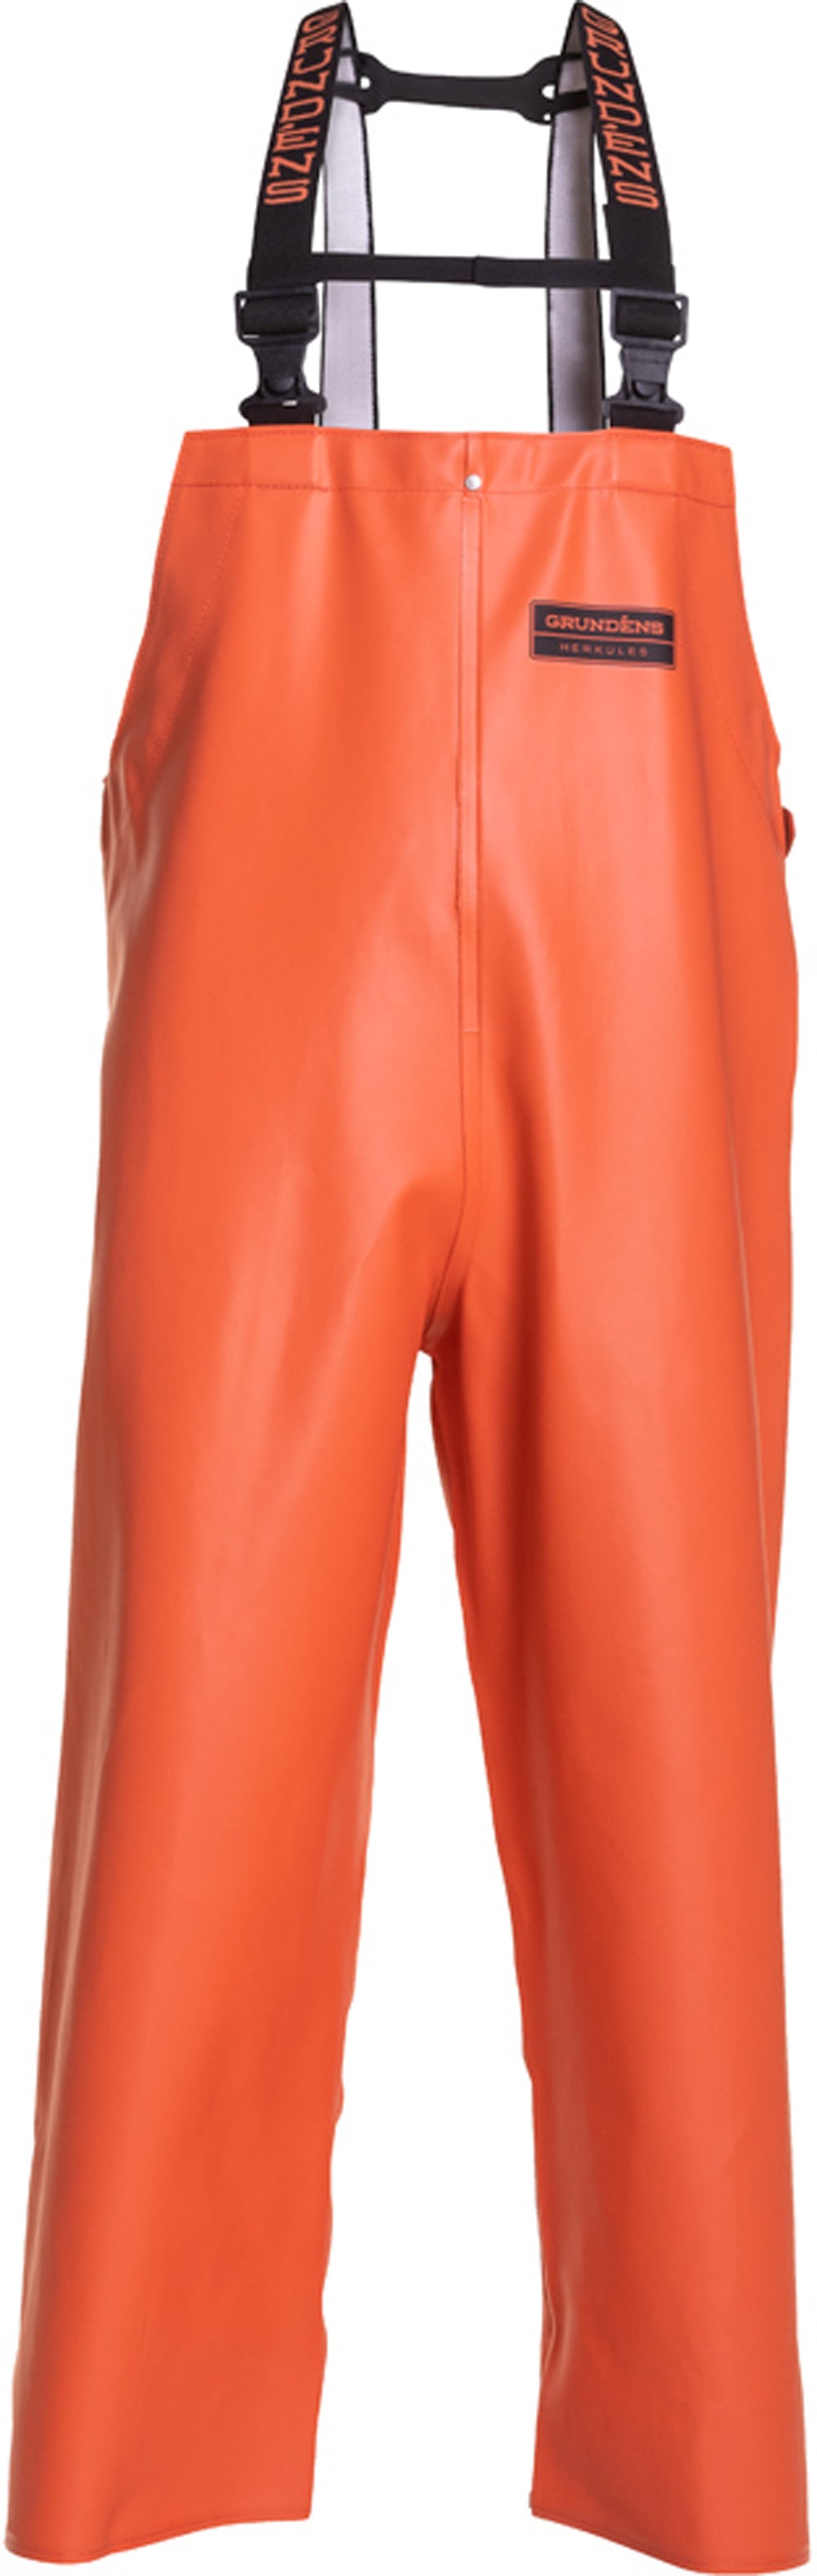 Herkules 16 Bib Pant in Orange color from the front view